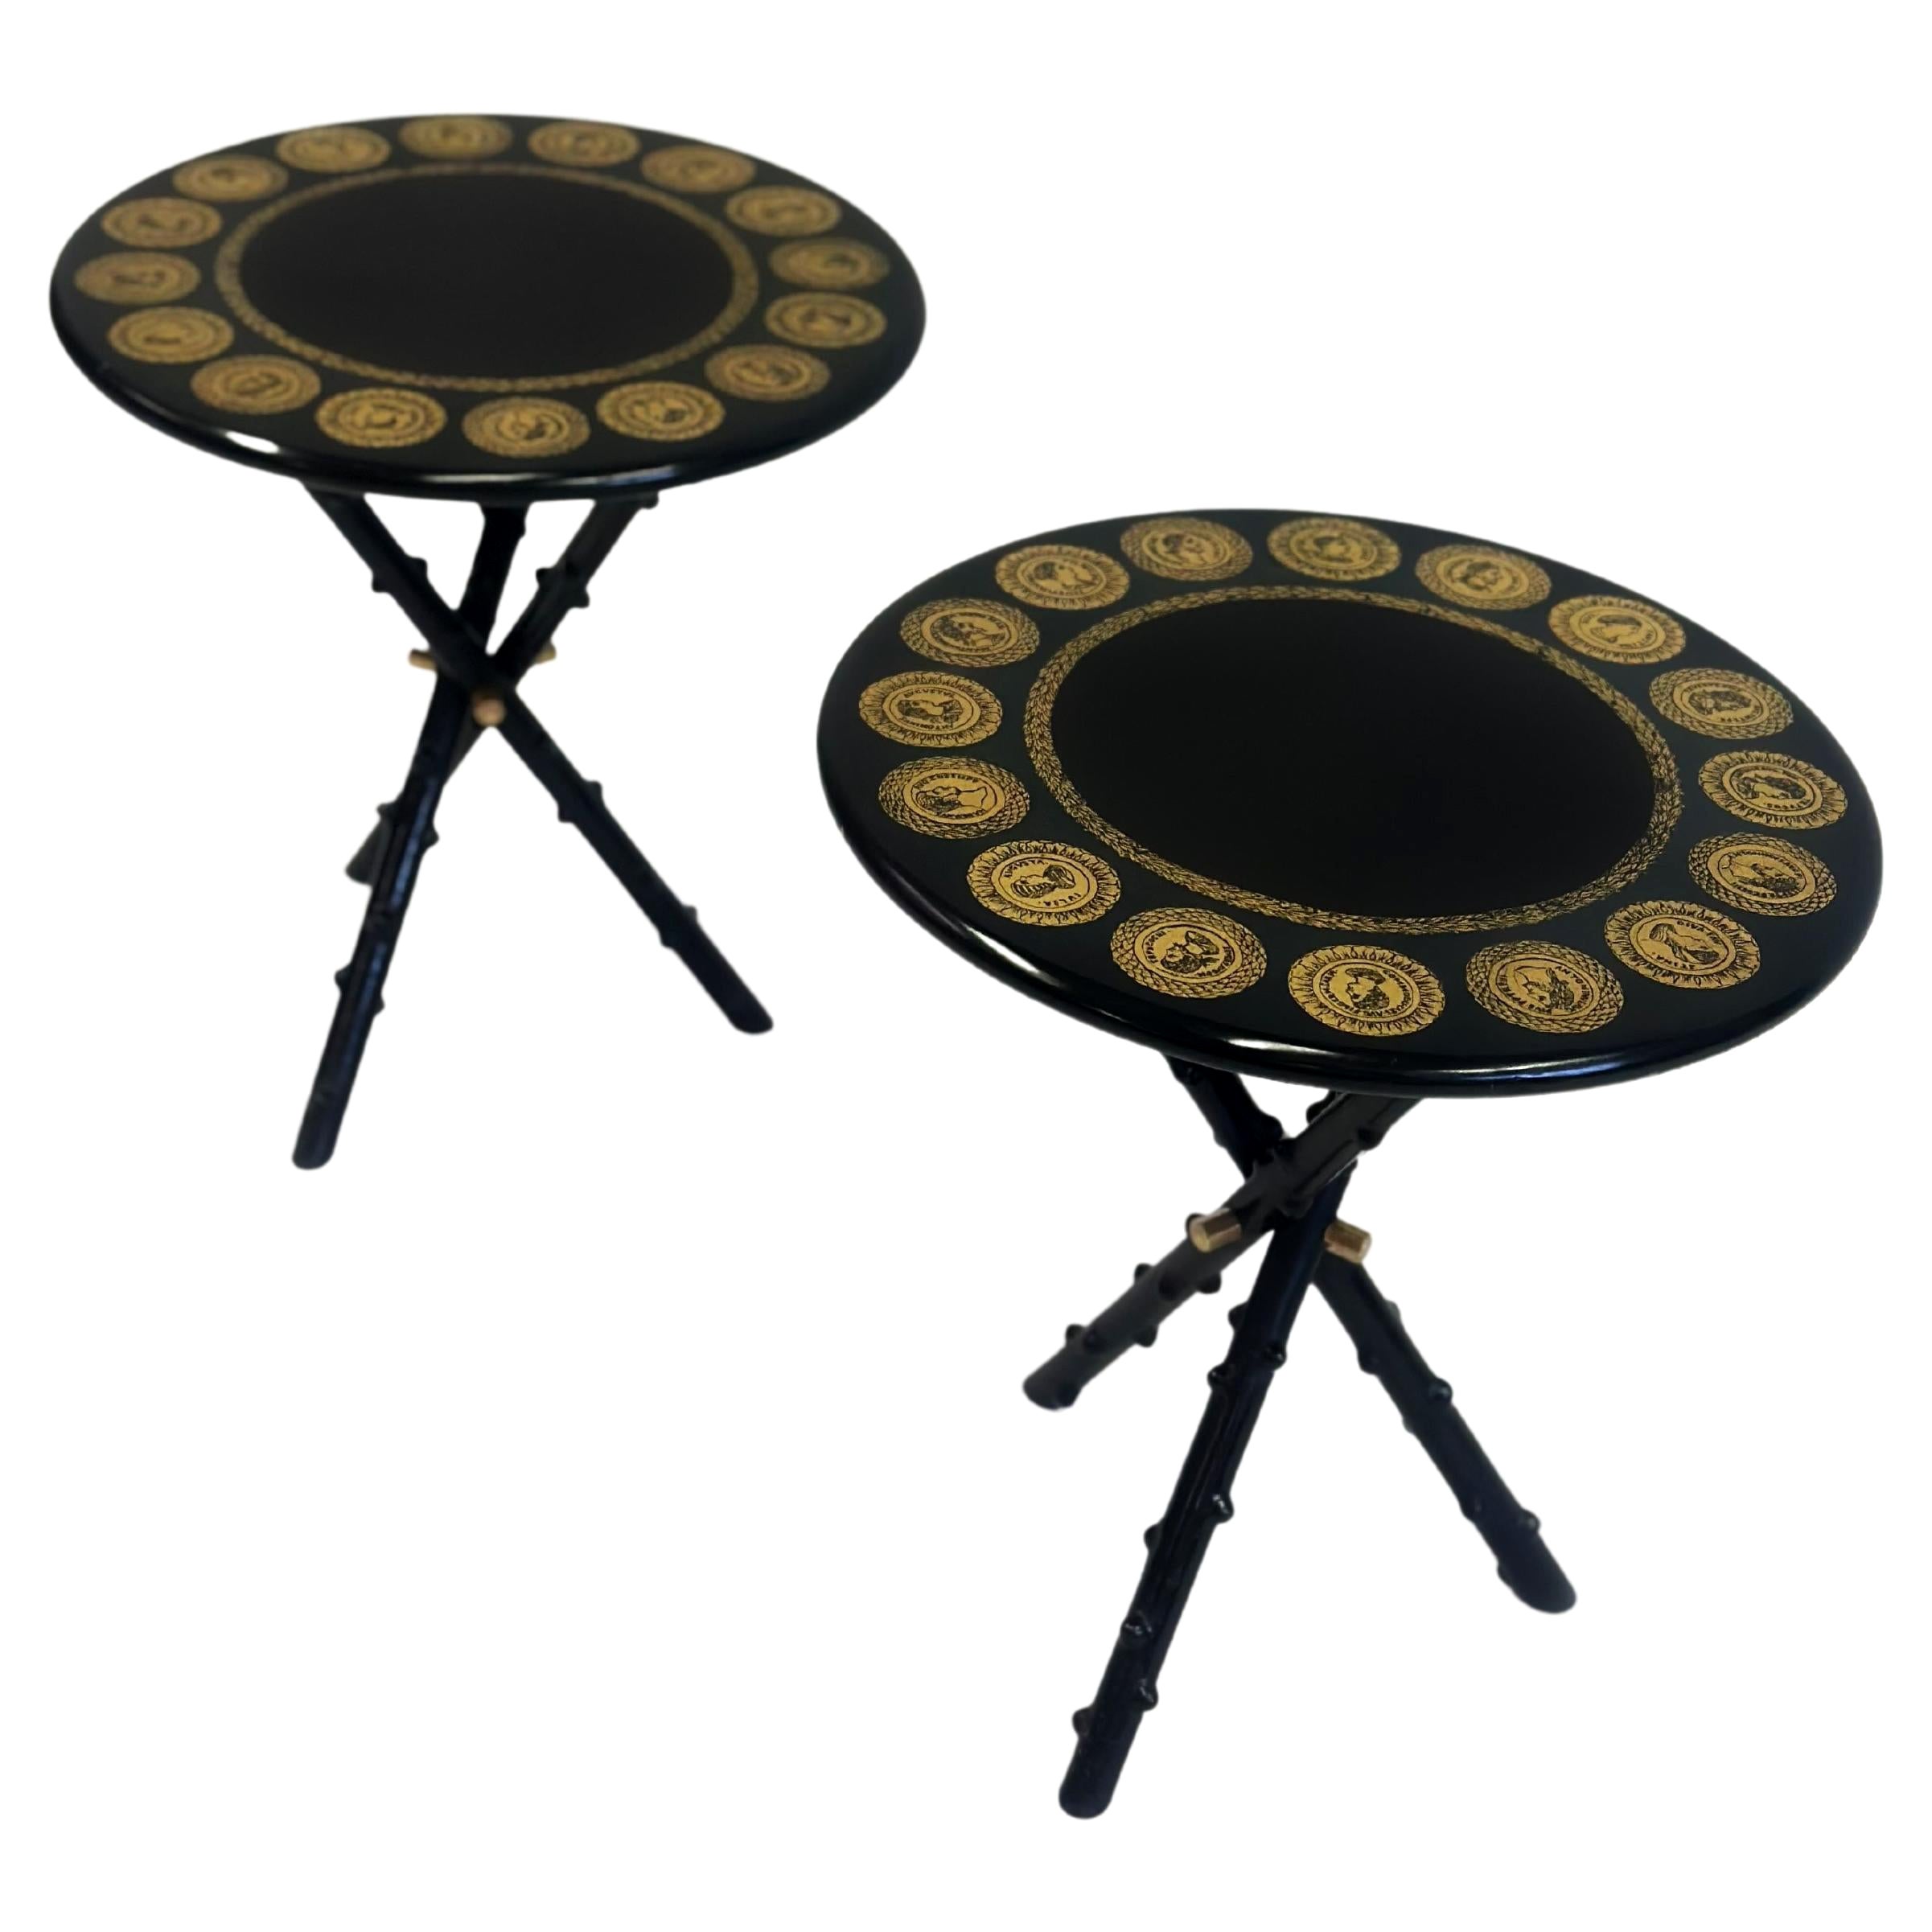 Pair Italian Midcentury Lacquer & Screenprint Side Tables by Piero Fornasetti